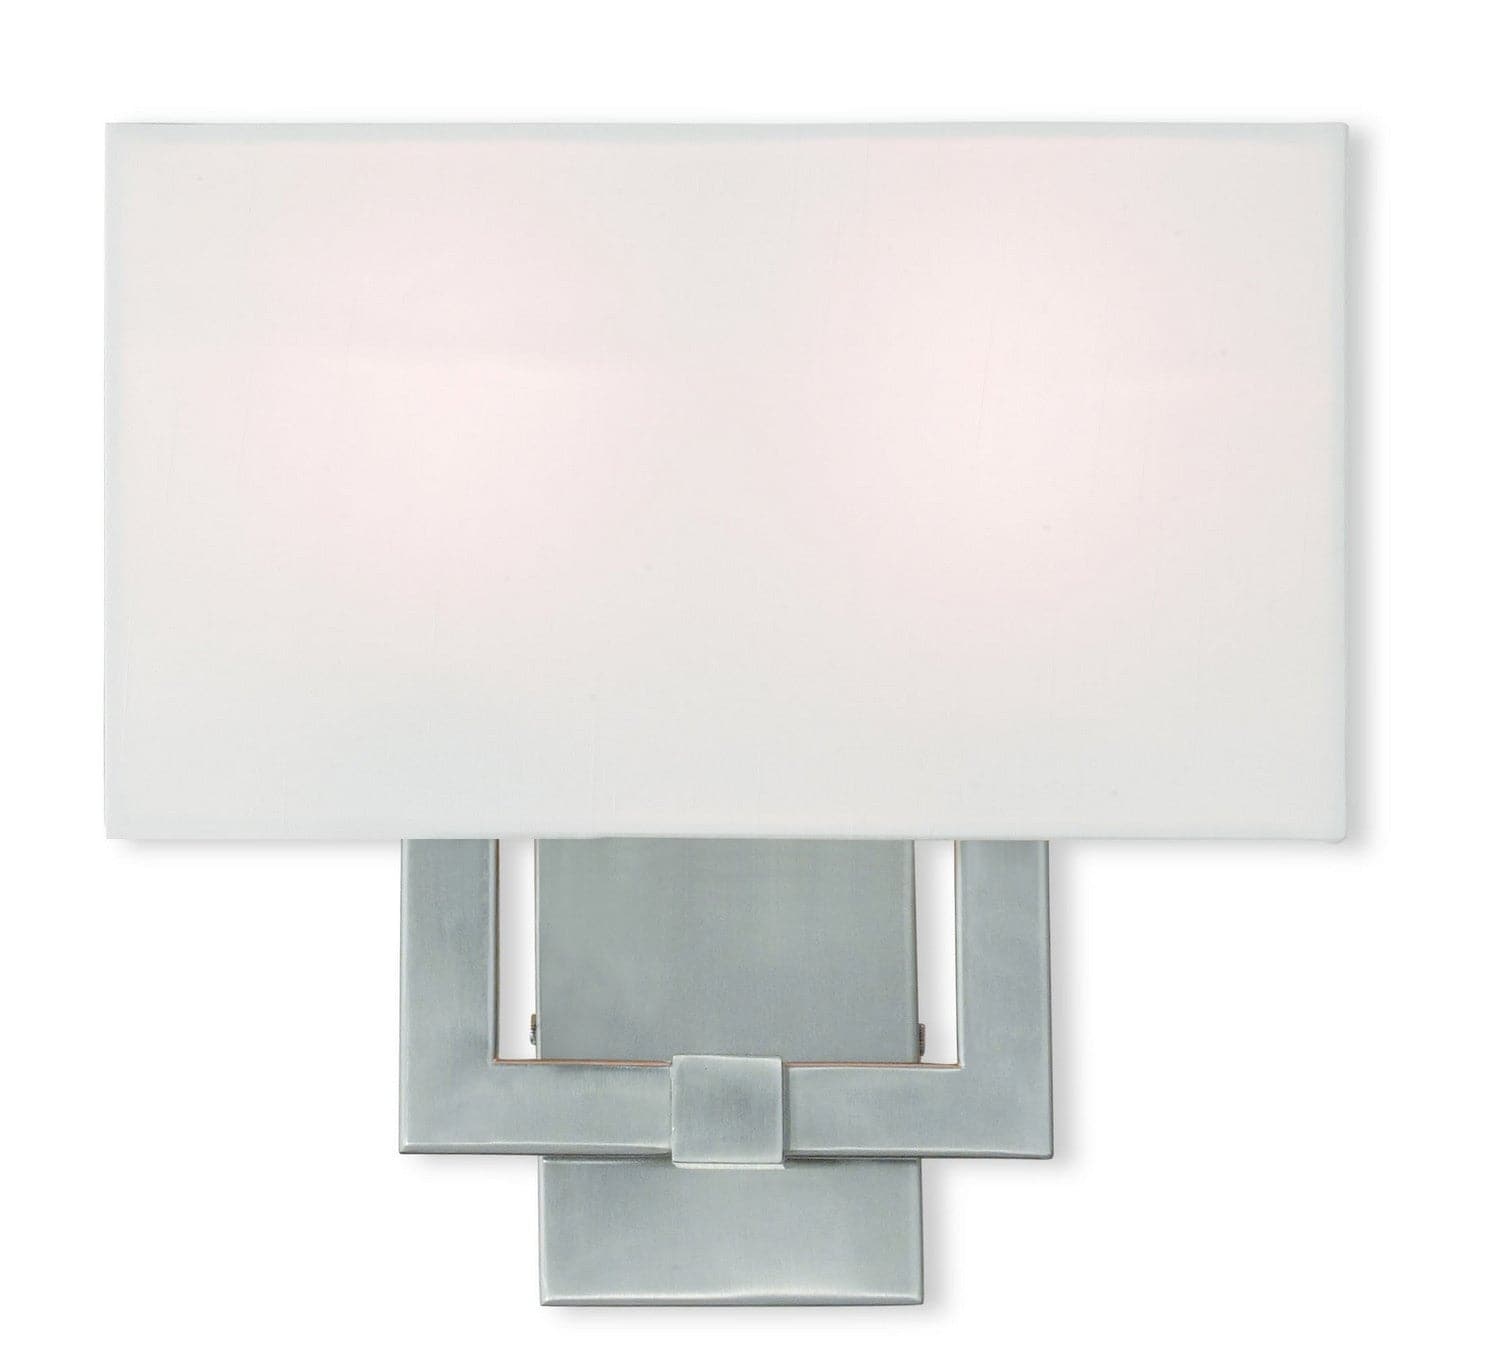 Livex Lighting - 51103-91 - Two Light Wall Sconce - ADA Wall Sconces - Brushed Nickel